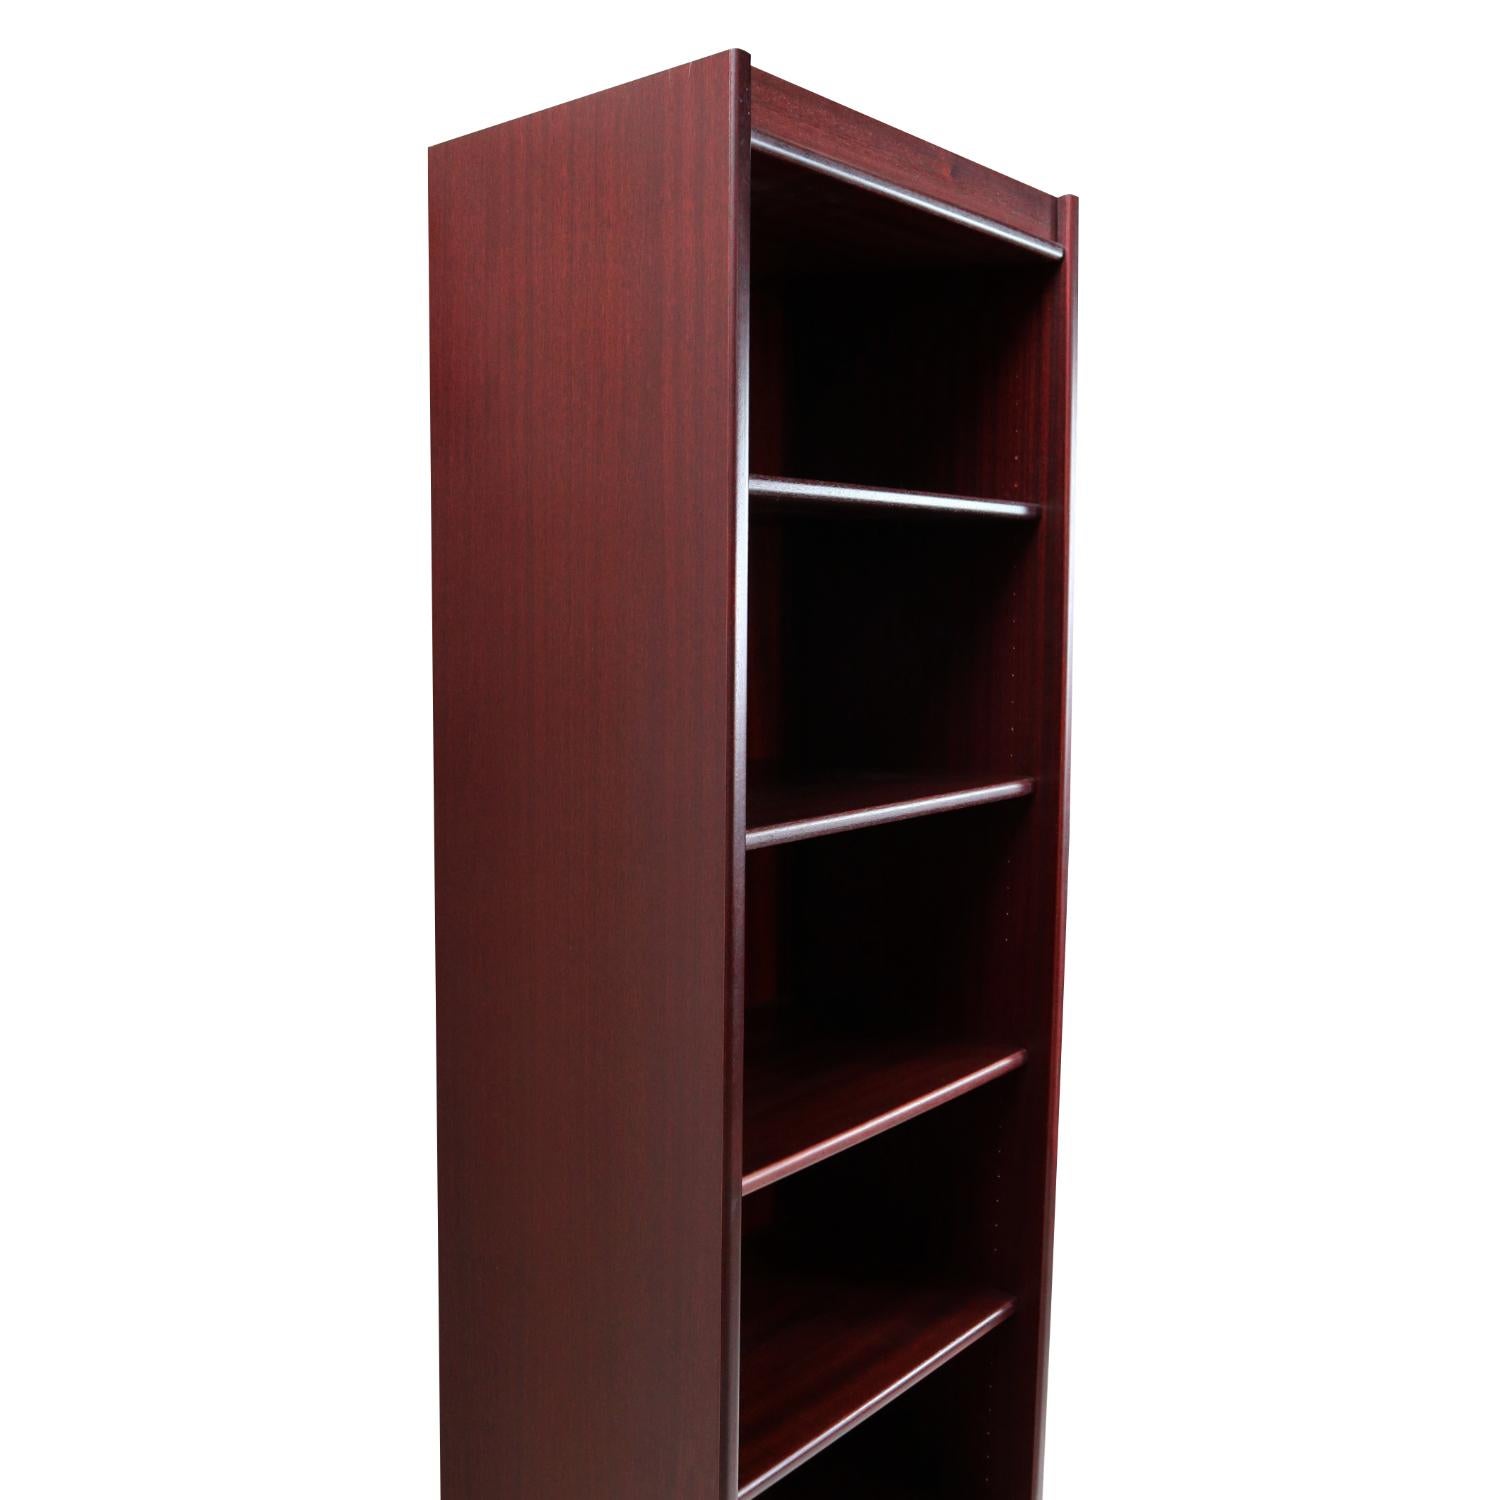 Late 20th Century Narrow Danish Modern Rosewood Bookcase with Adjustable Shelves